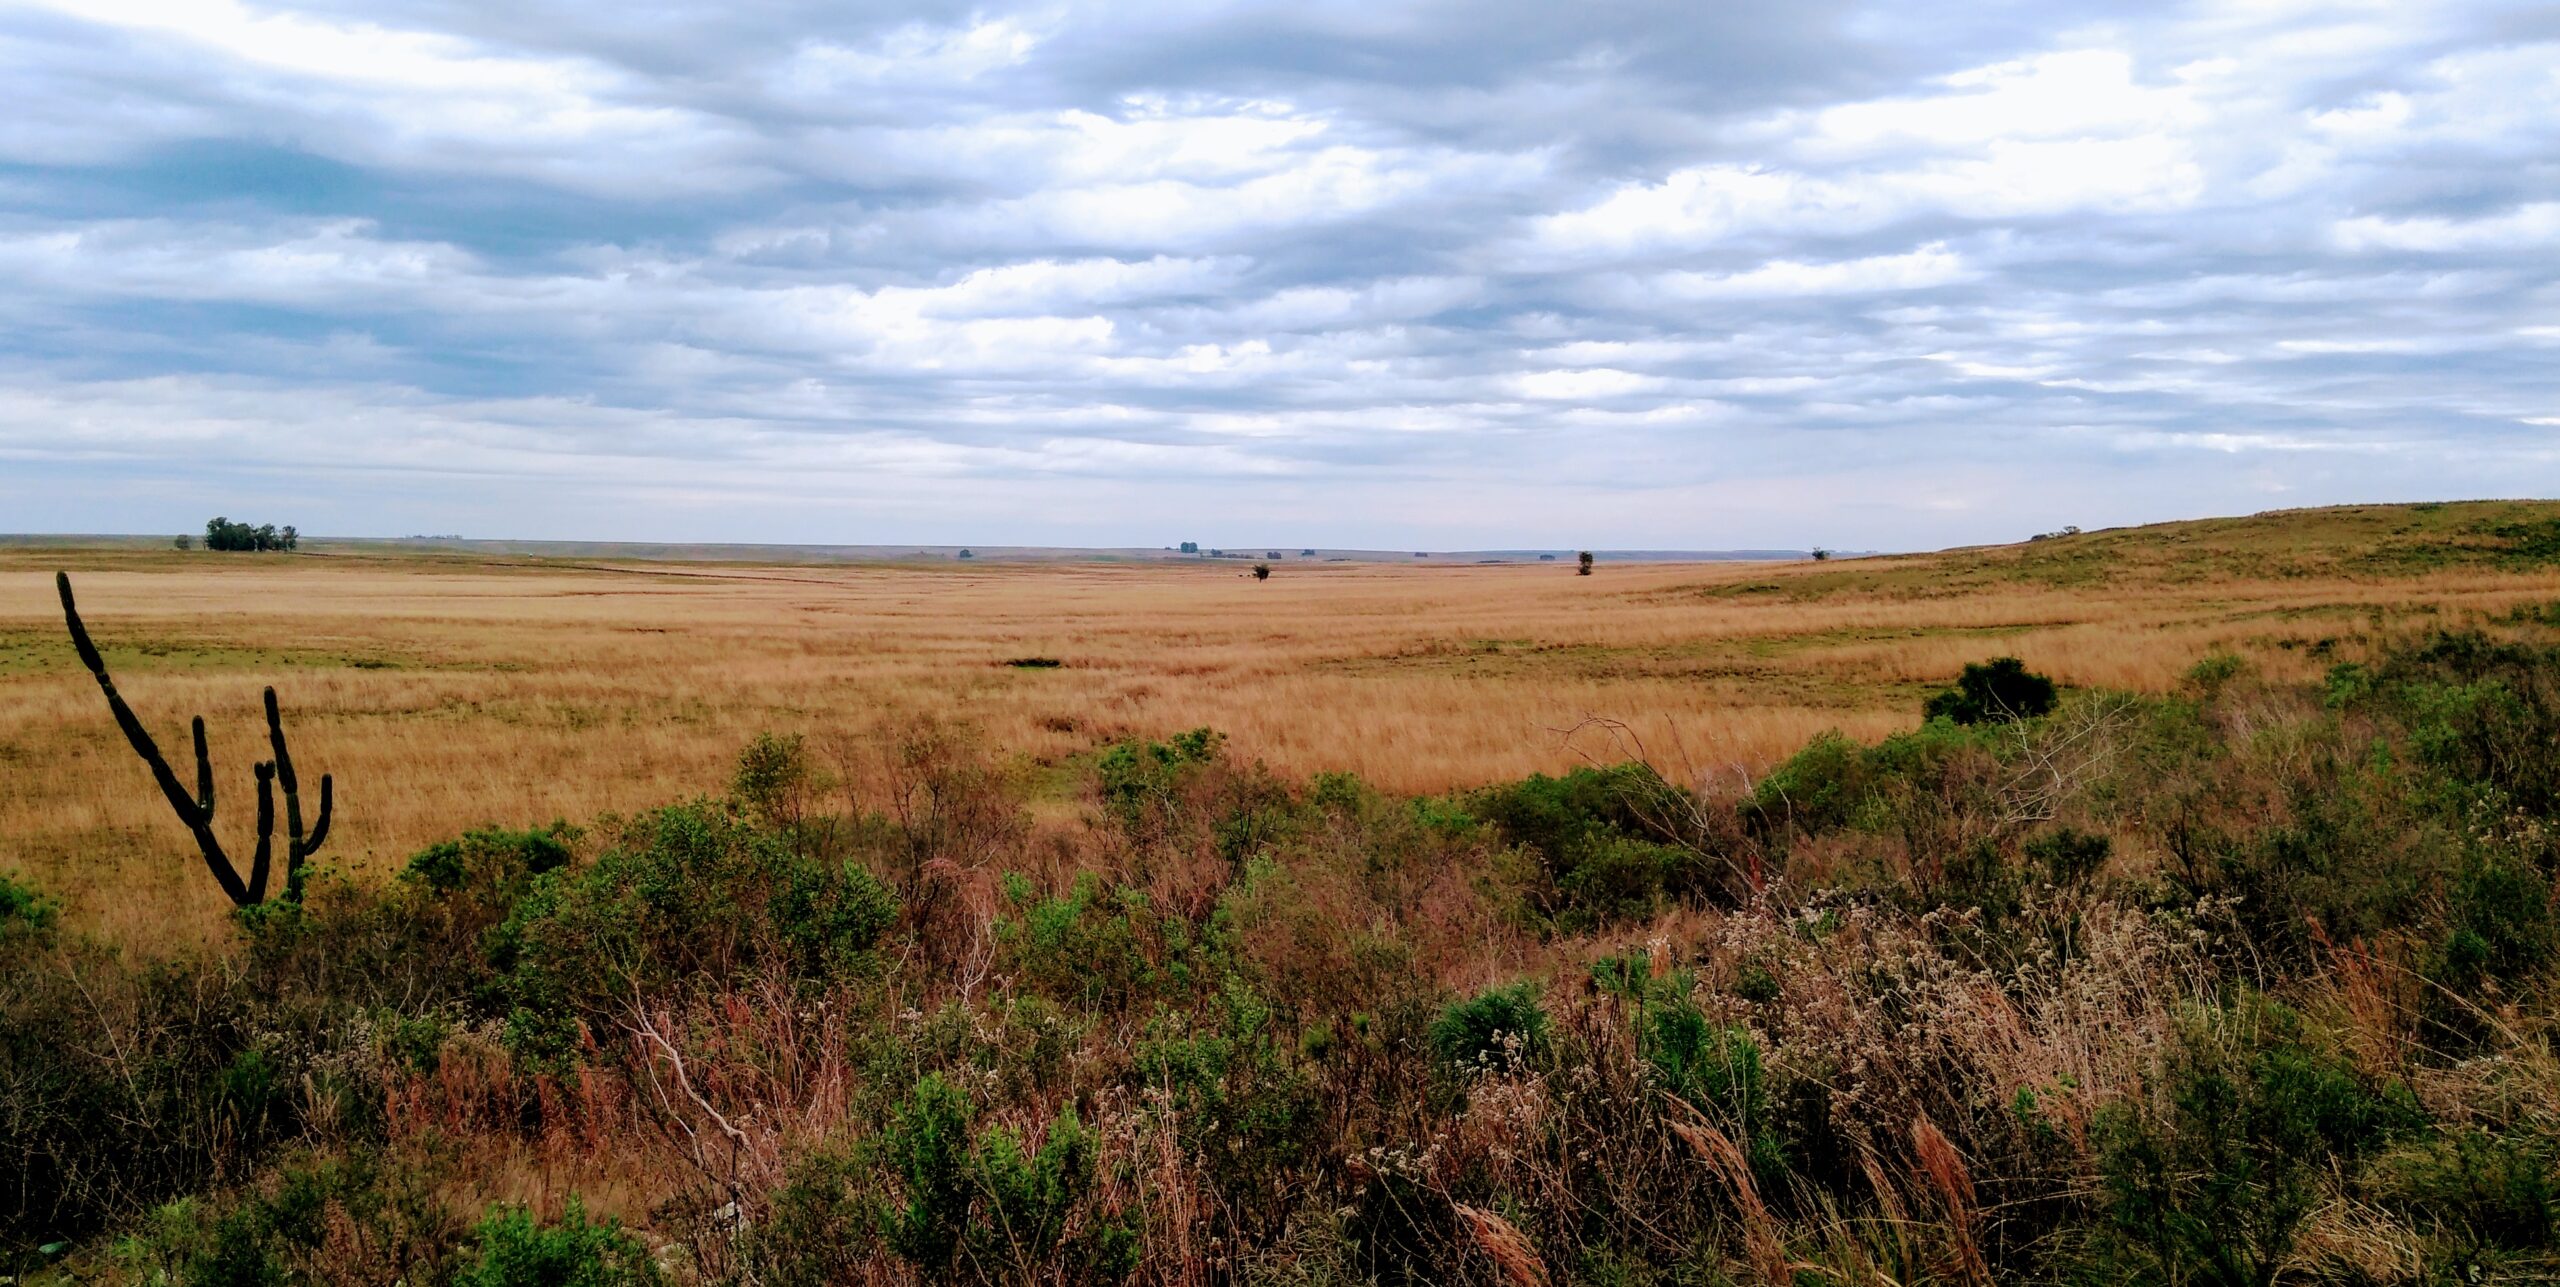 Panorama of the grassland landscape of the South American pampas in Brazil.